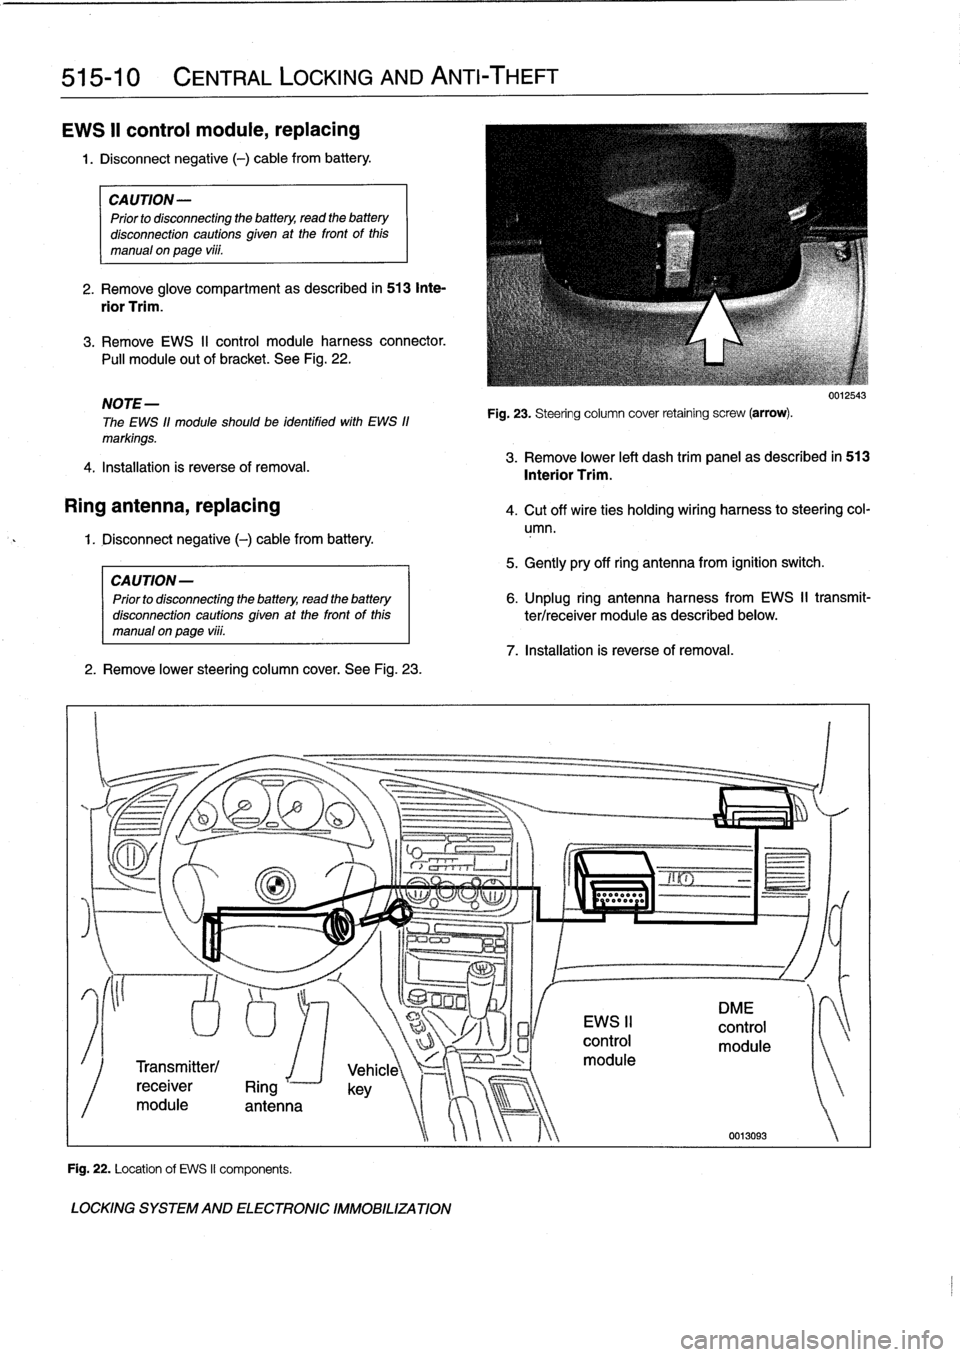 BMW M3 1995 E36 Workshop Manual 
515-10

	

CENTRAL
LOCKING
AND
ANTI-THEFT

EWS
II
control
module,
replacing

1
.
Disconnect
negative
(-)
cable
from
battery
.

CAUTION-

Prior
to
disconnecting
the
battery,
read
the
battery

disconne